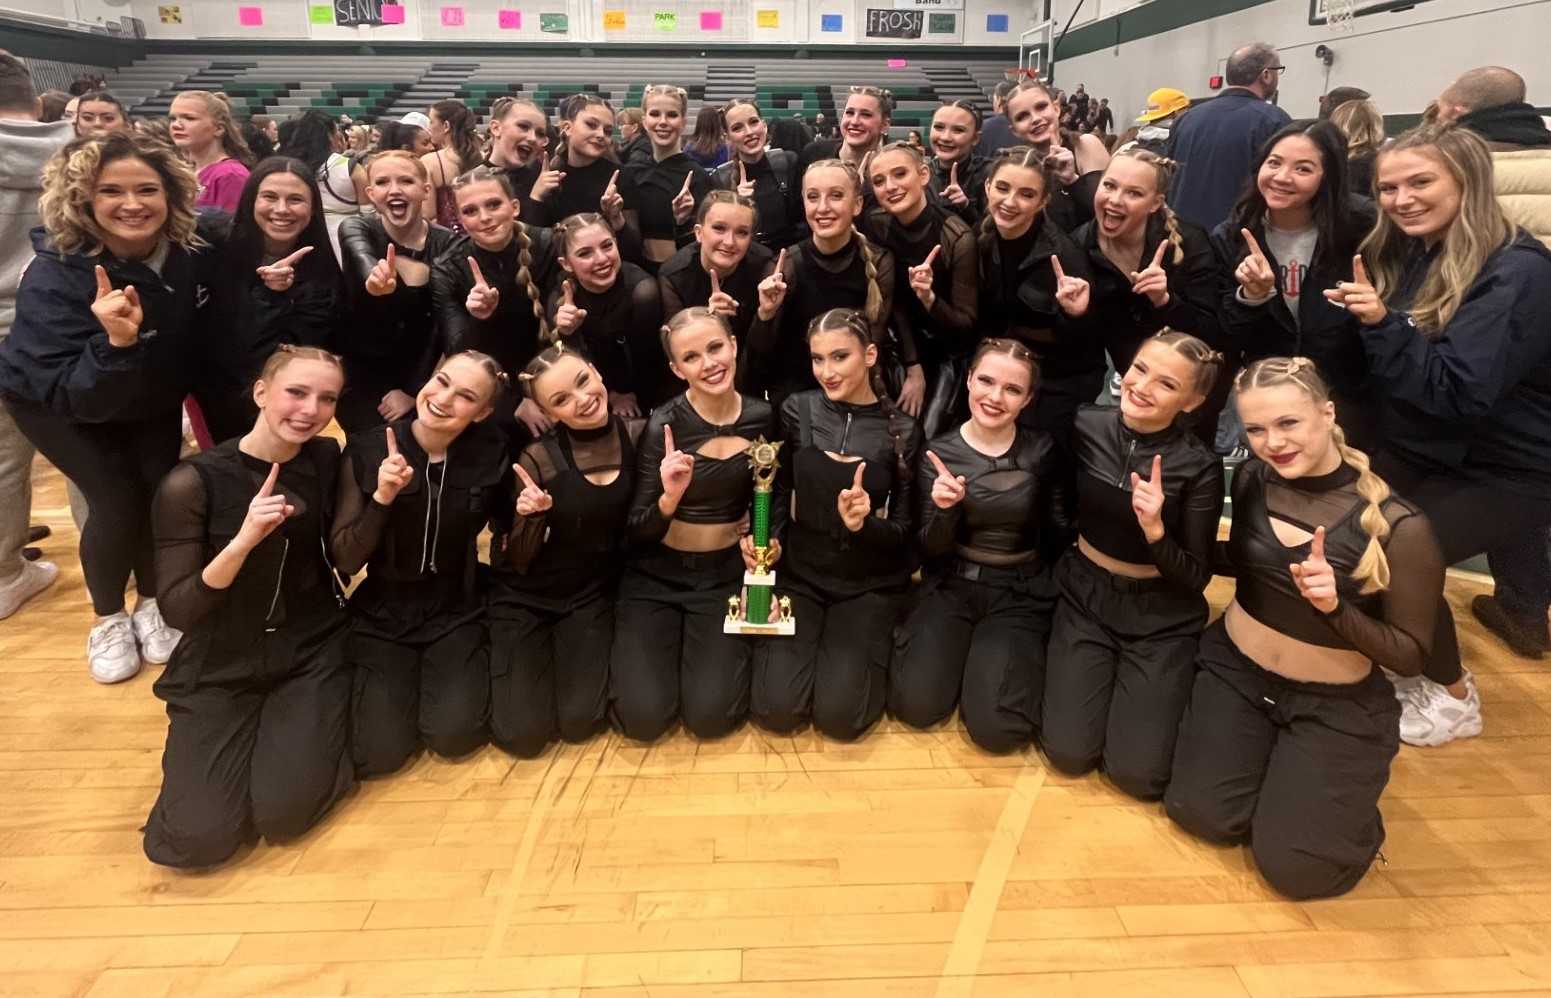 Lake Oswego's dance team poses with its trophy at the Reynolds competition last weekend.